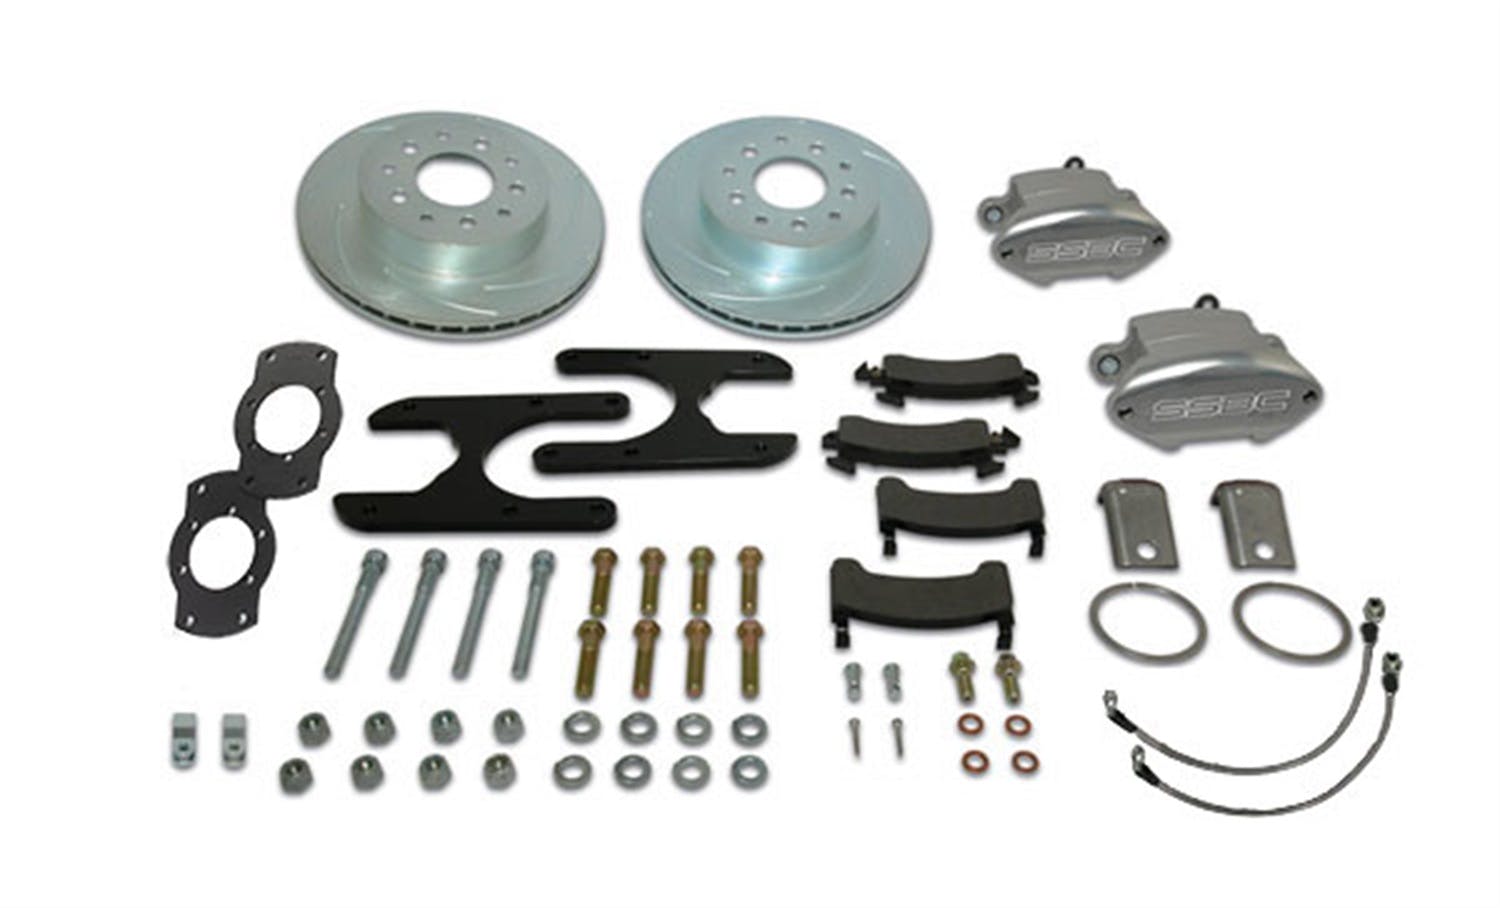 Stainless Steel Brakes A125-30BK Kit A125-30 w/black calipers